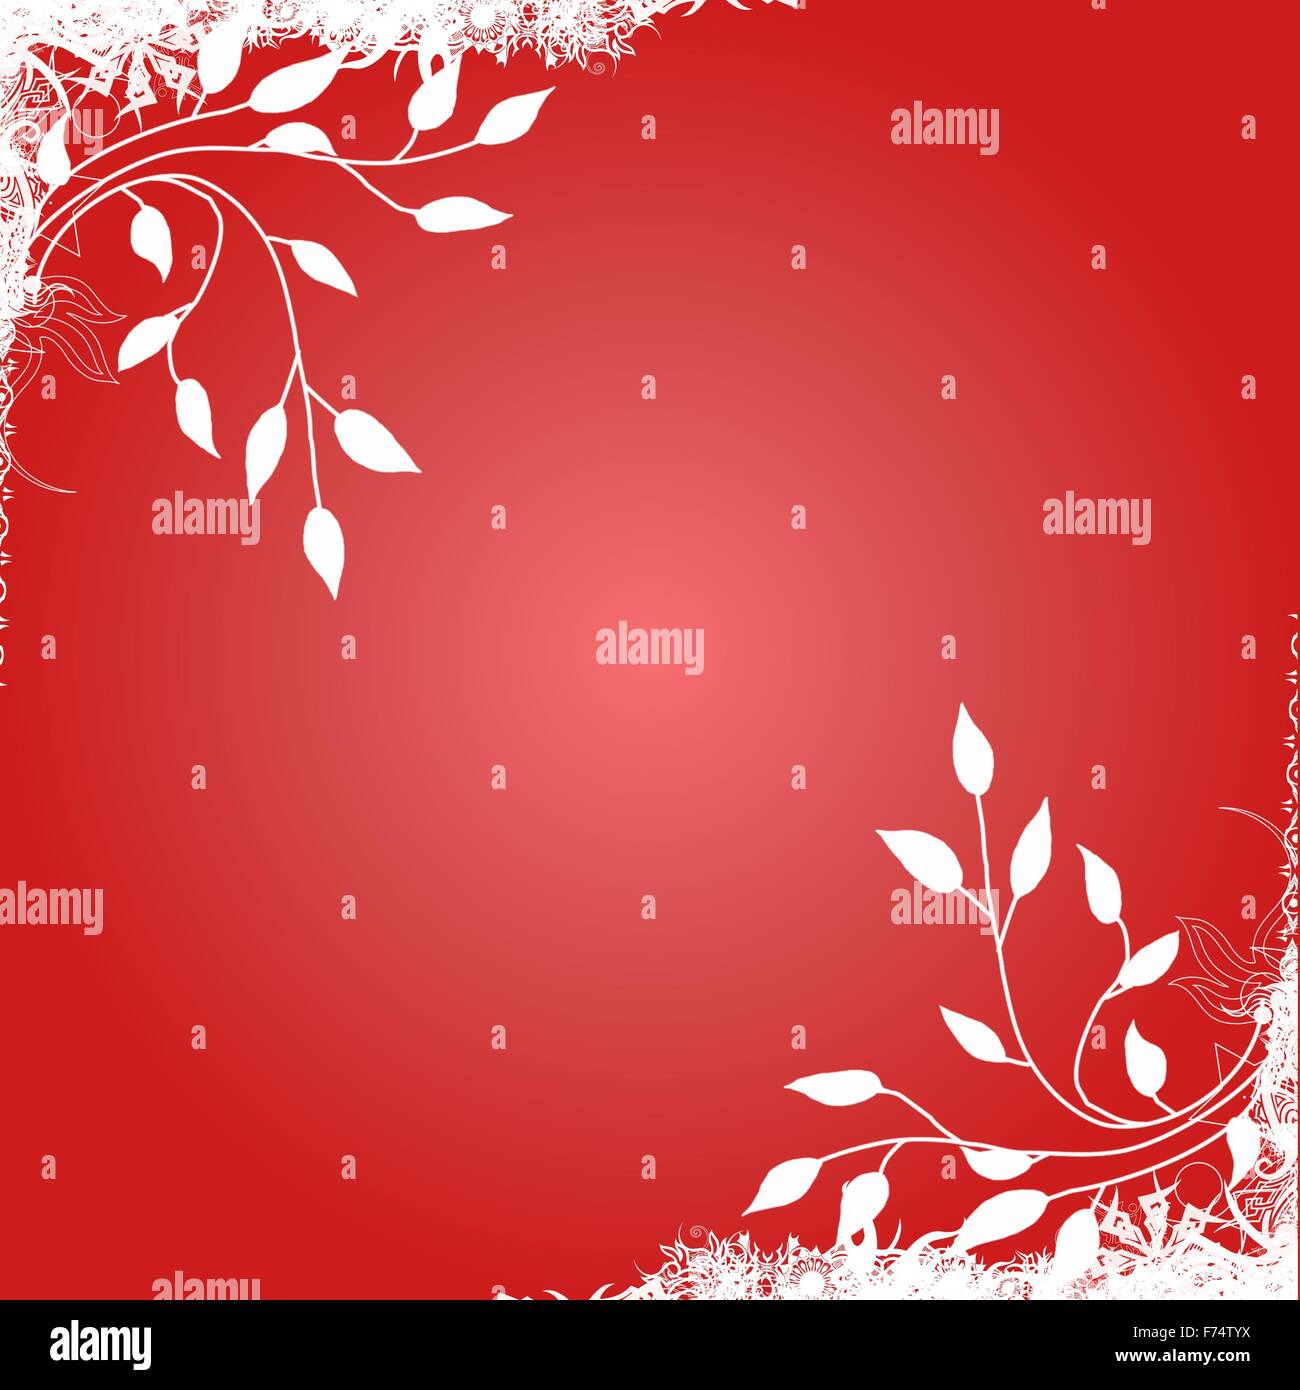 RED WHITE FLORAL BACKGROUND Stock Photo